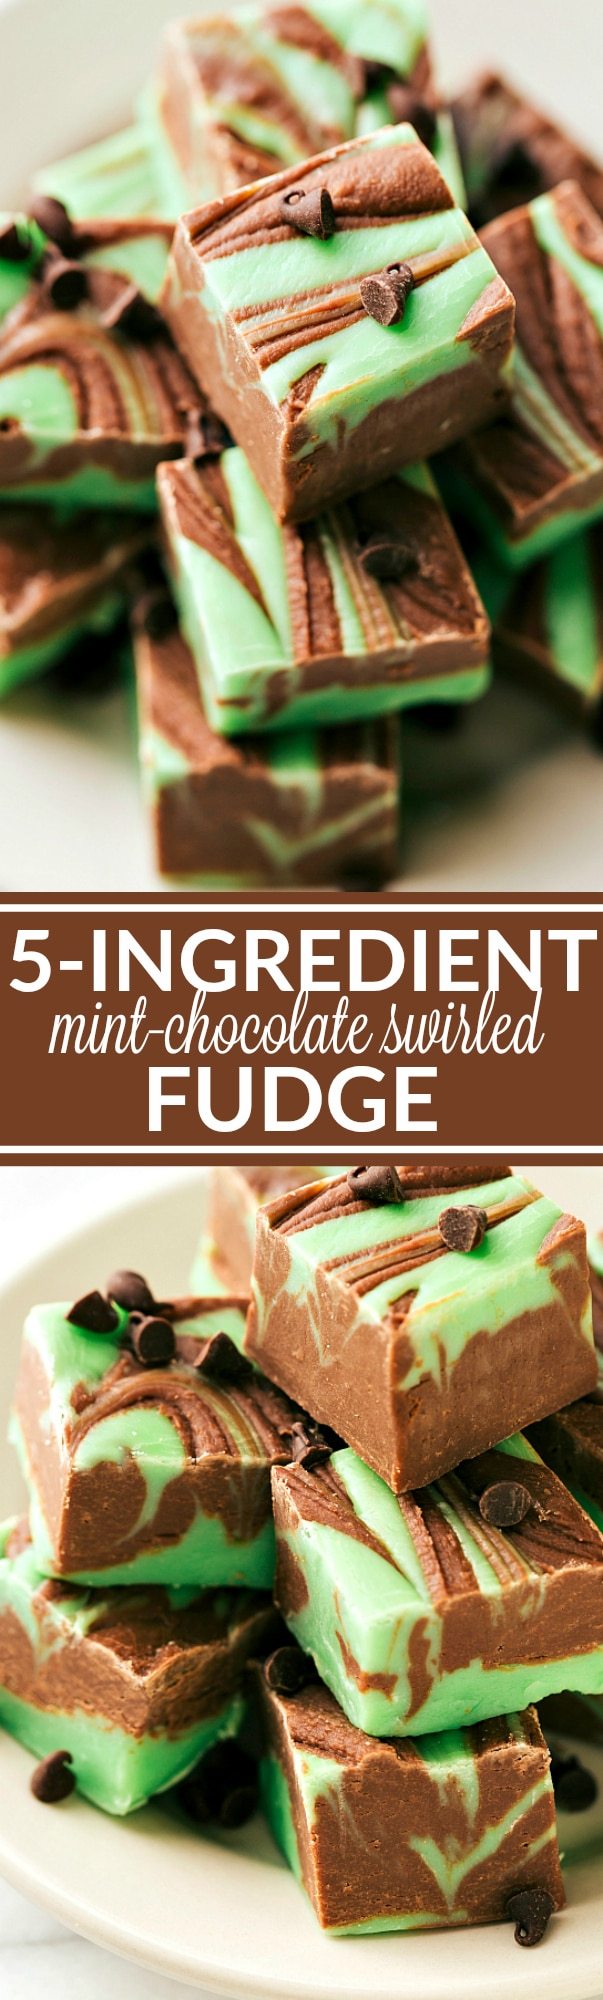 Easy MICROWAVE FUDGE! Mint Swirled Chocolate Microwave fudge that takes minutes to whip together! Recipe via chelseasmessyapron.com